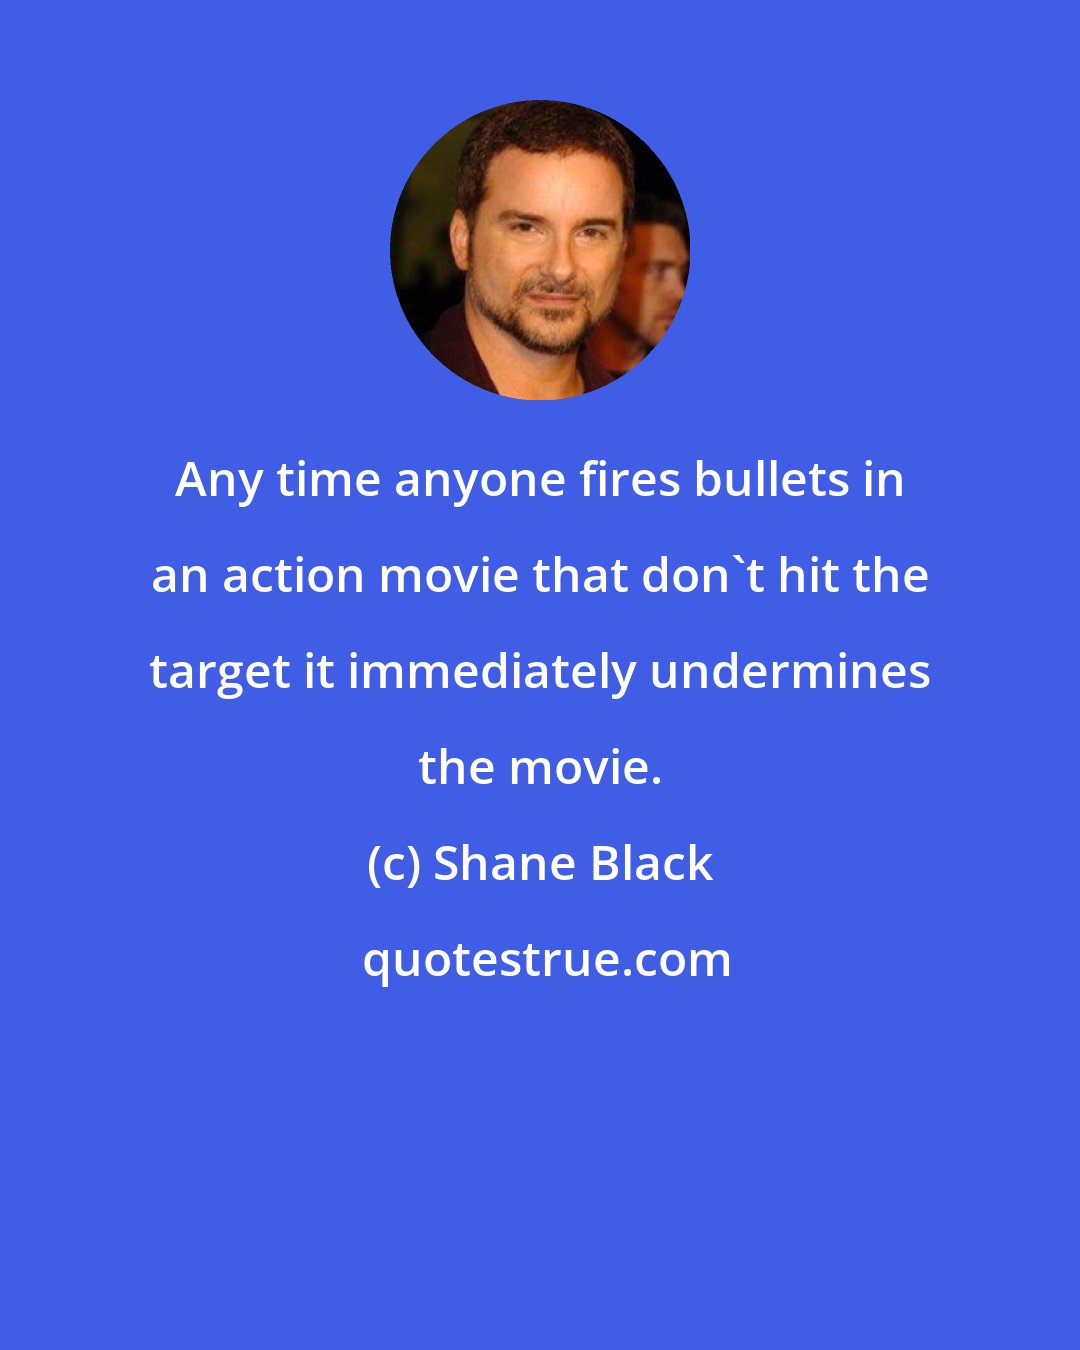 Shane Black: Any time anyone fires bullets in an action movie that don't hit the target it immediately undermines the movie.